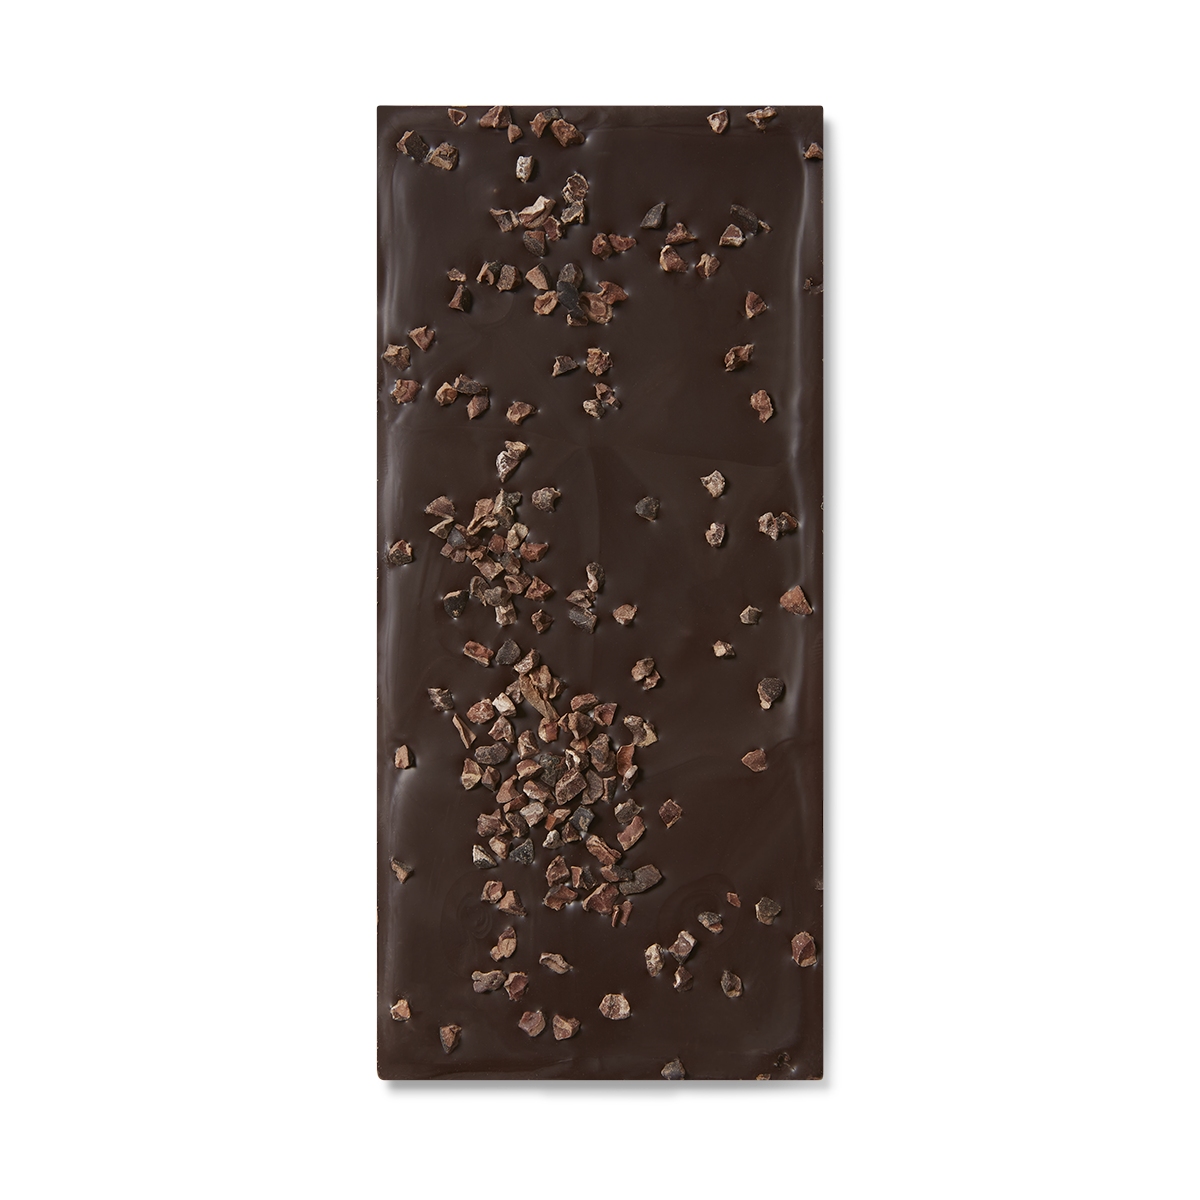 Exposed chocolate block with cocoa nibs